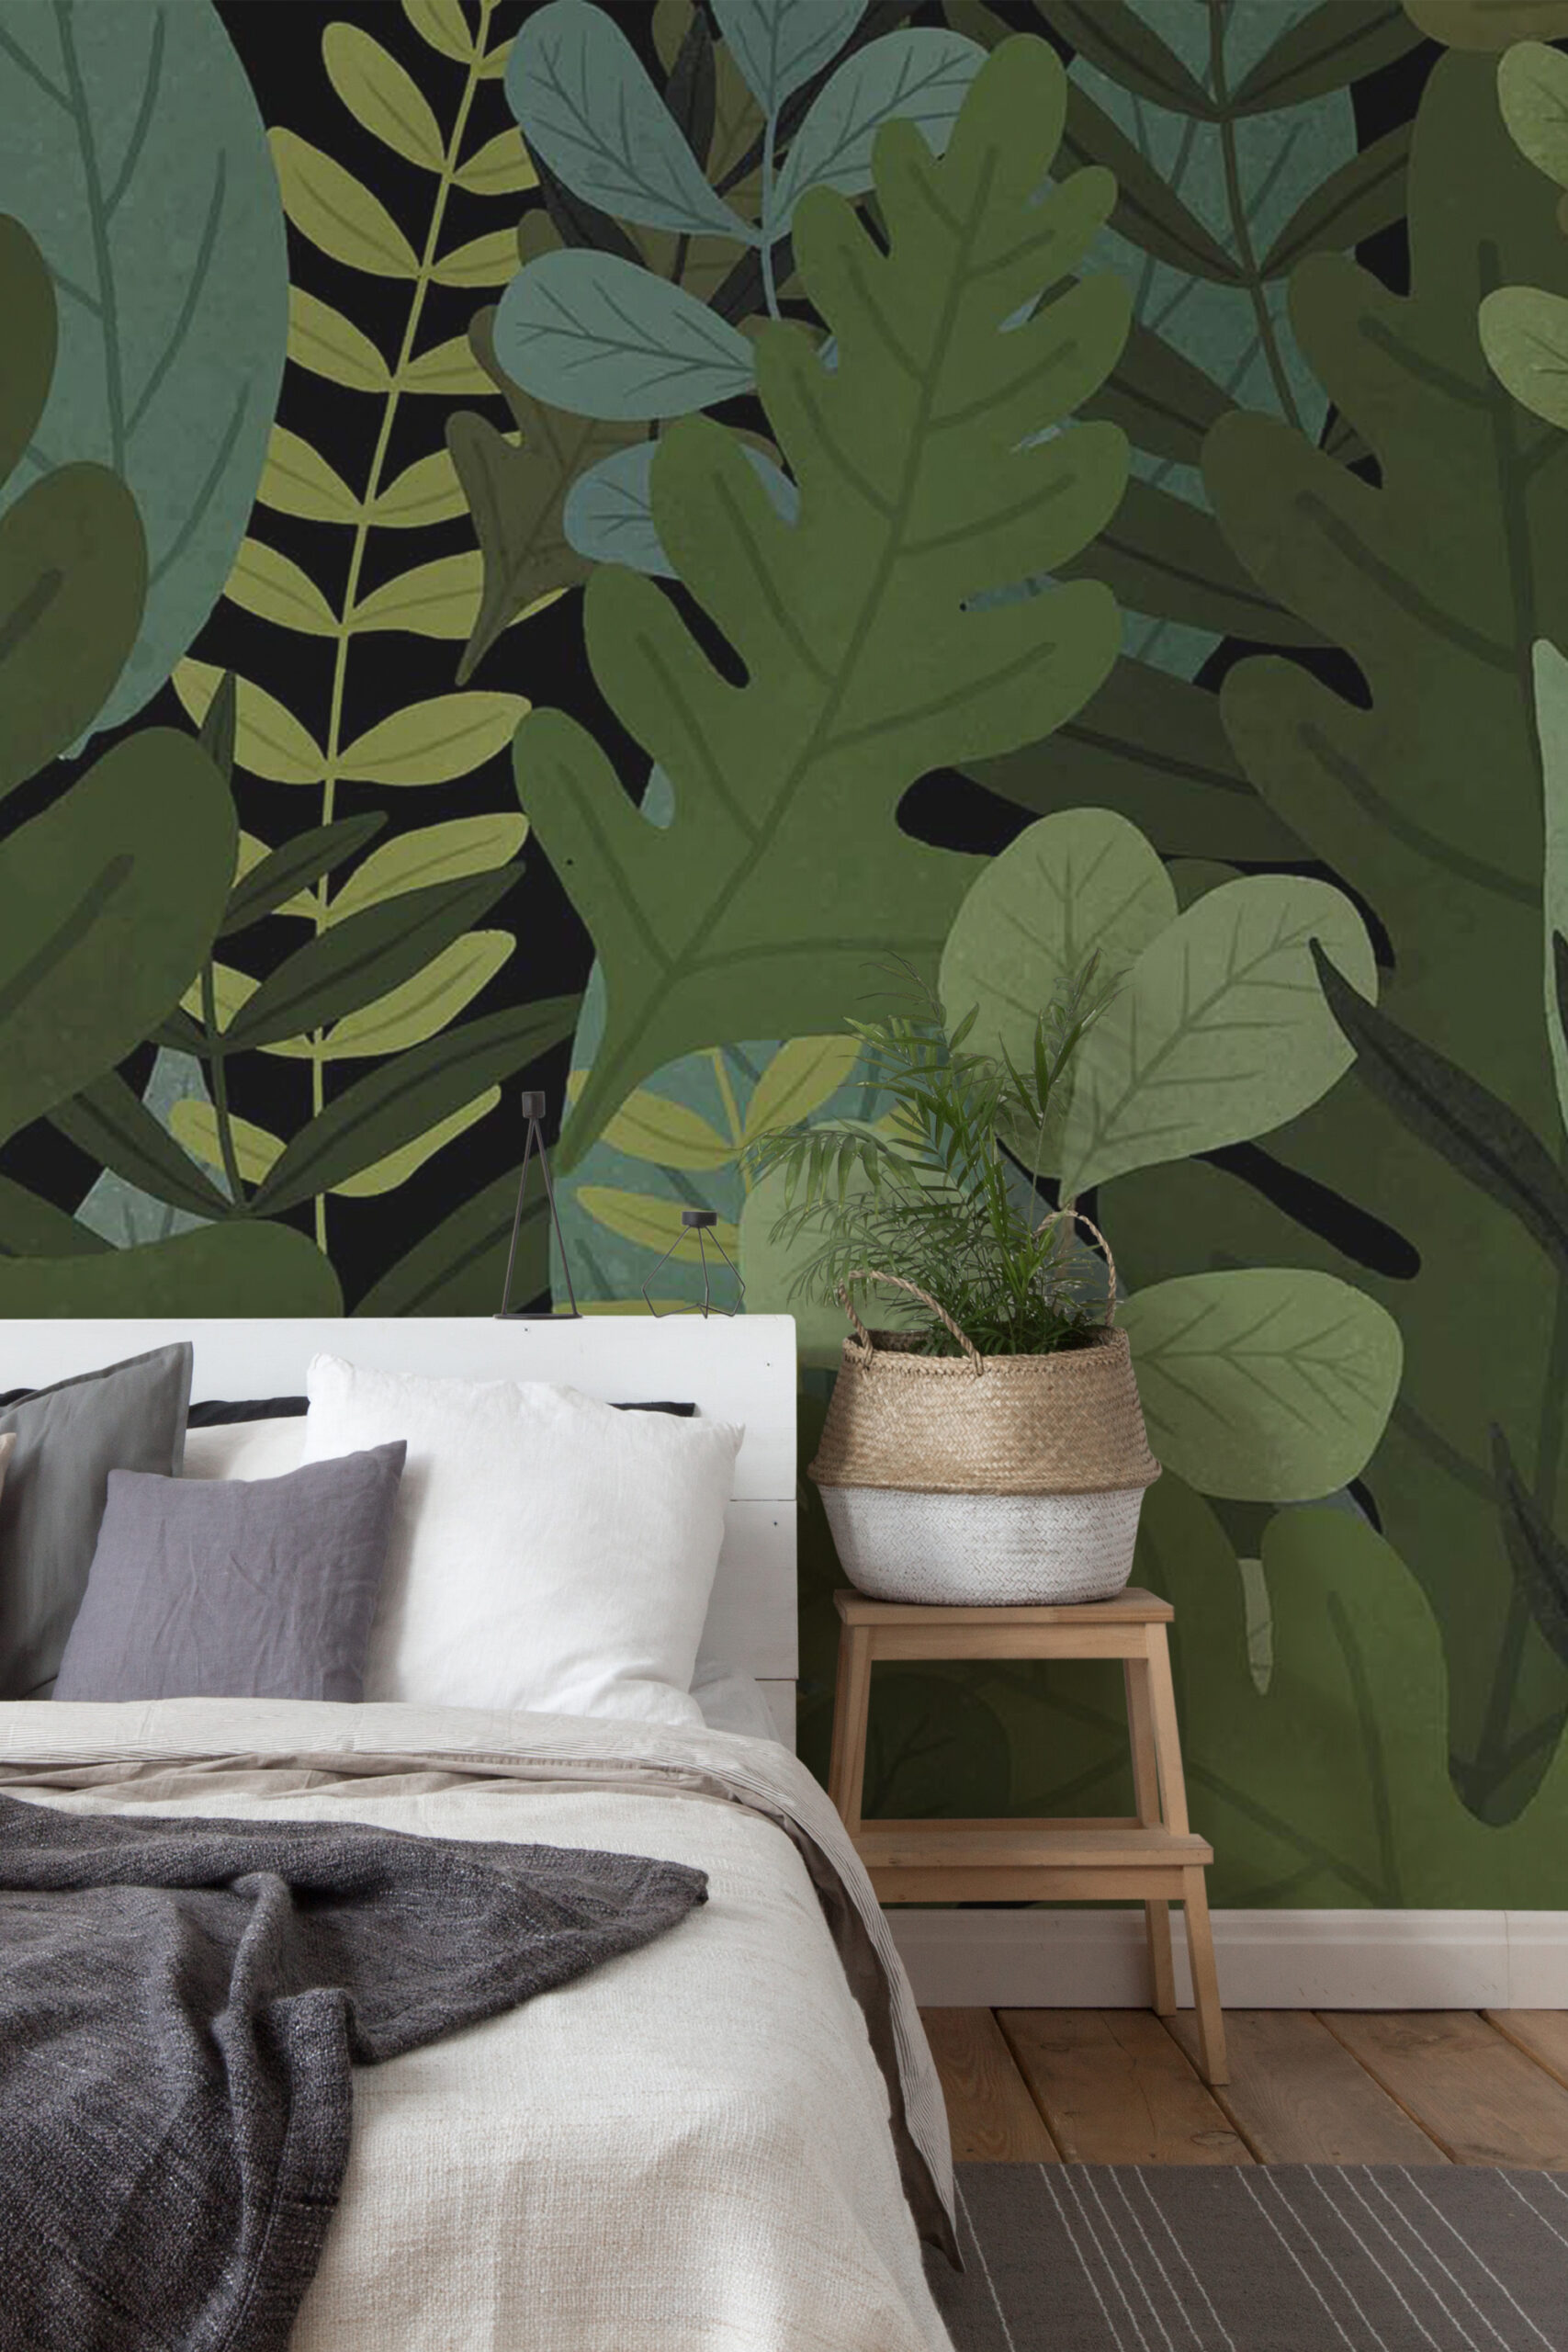 Fancy Walls Botanical Vibrant Green Leaf removable wall mural